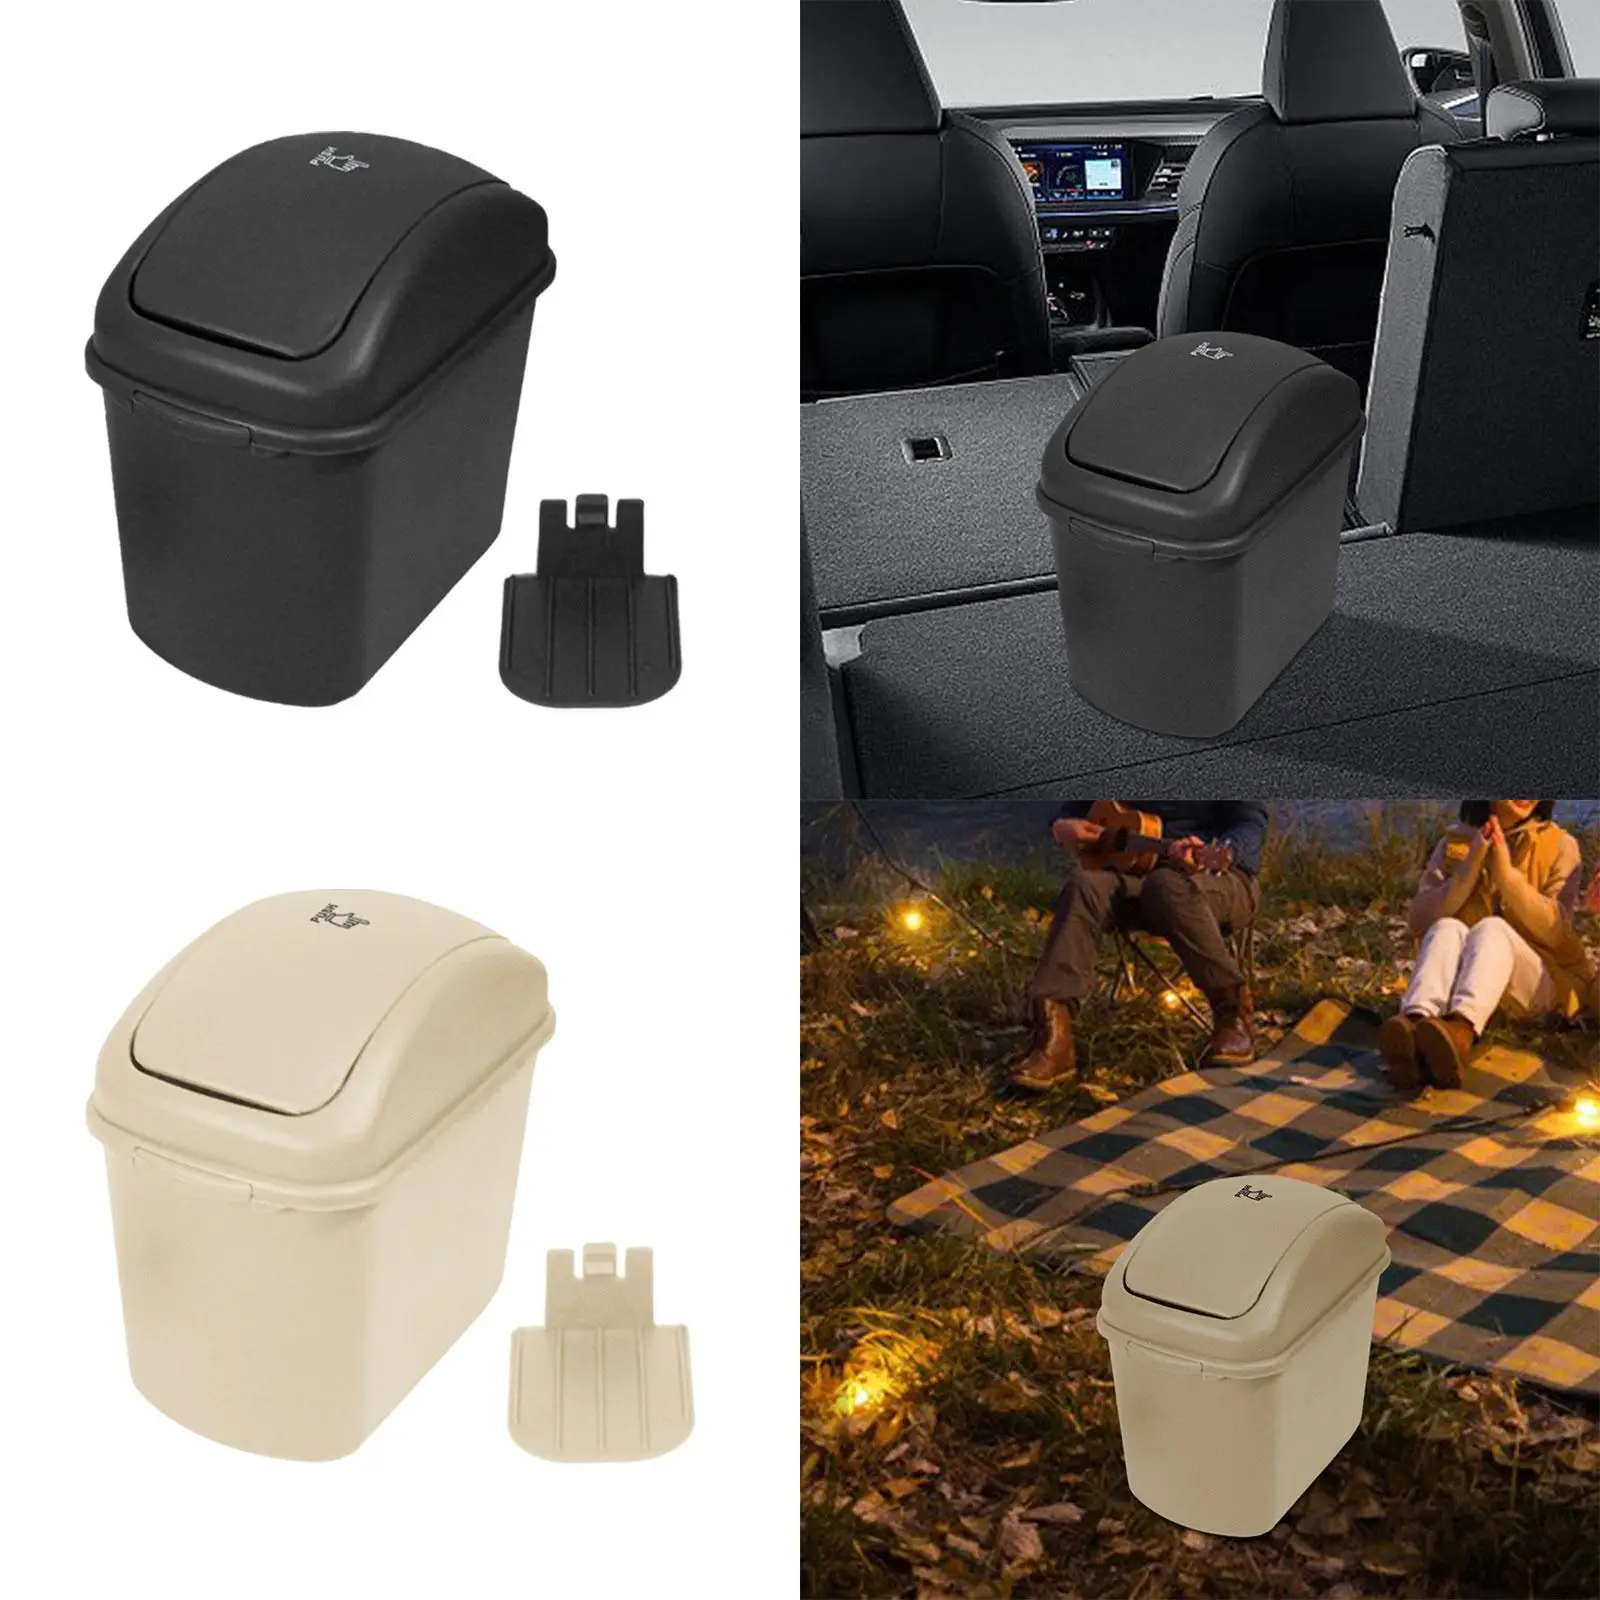 Car Trash Can with Lid Outdoor Kitchen Rubbish Can Garbage Bin Storage Garbage Organizer for Camper RV Bedroom Hiking Automotive